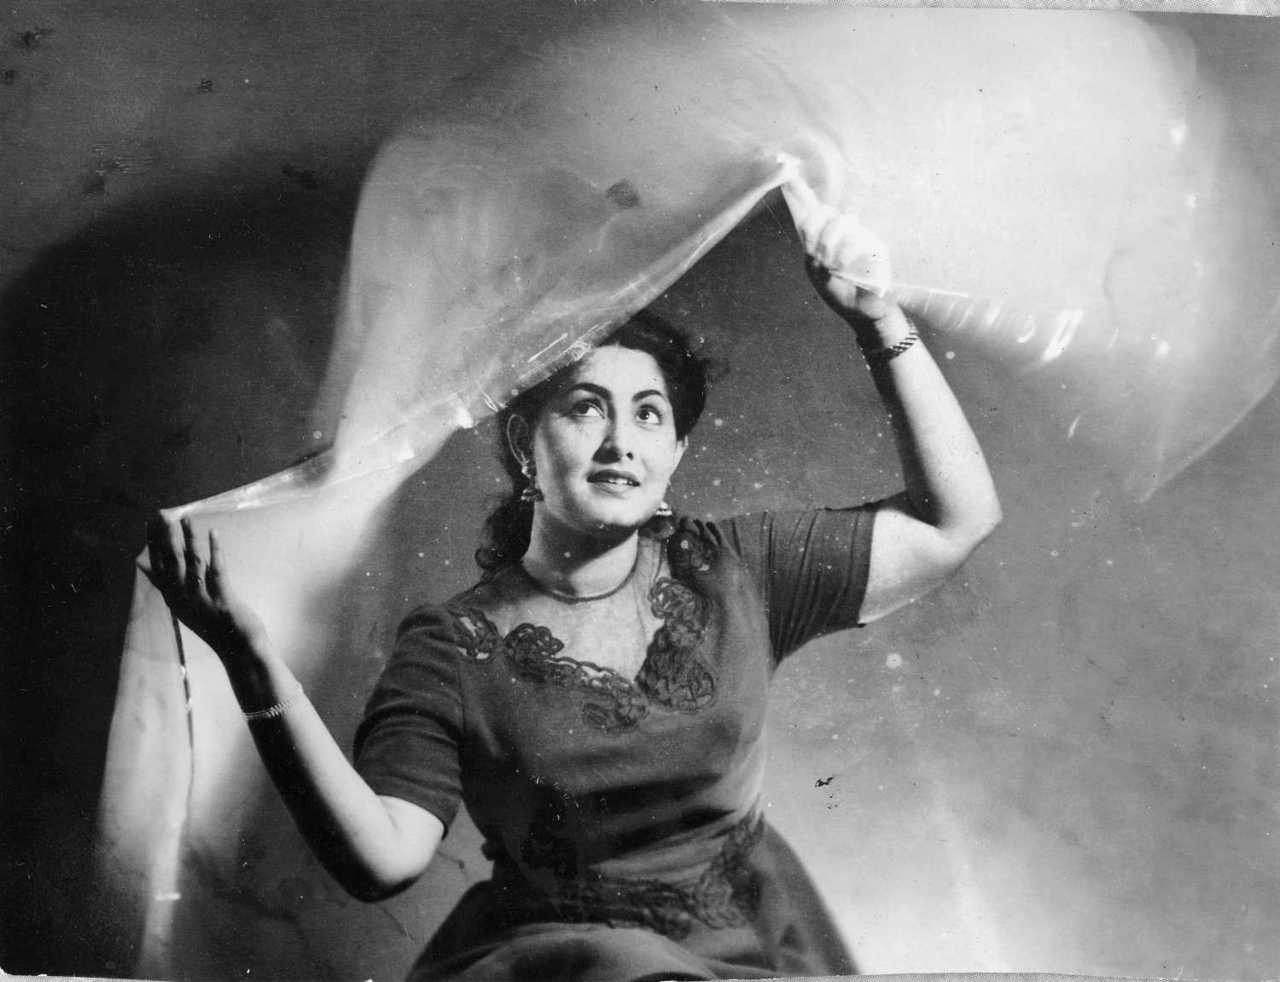 bollywoodirect:“ Remembering the ‘Lara Lappa girl’ Meena Shorey on her 30th death anniversary today. For today’s generation, the name Meena Shorey may mean nothing, but music lovers would definitely remember the ever-popular song “Lara Lappa Lara...